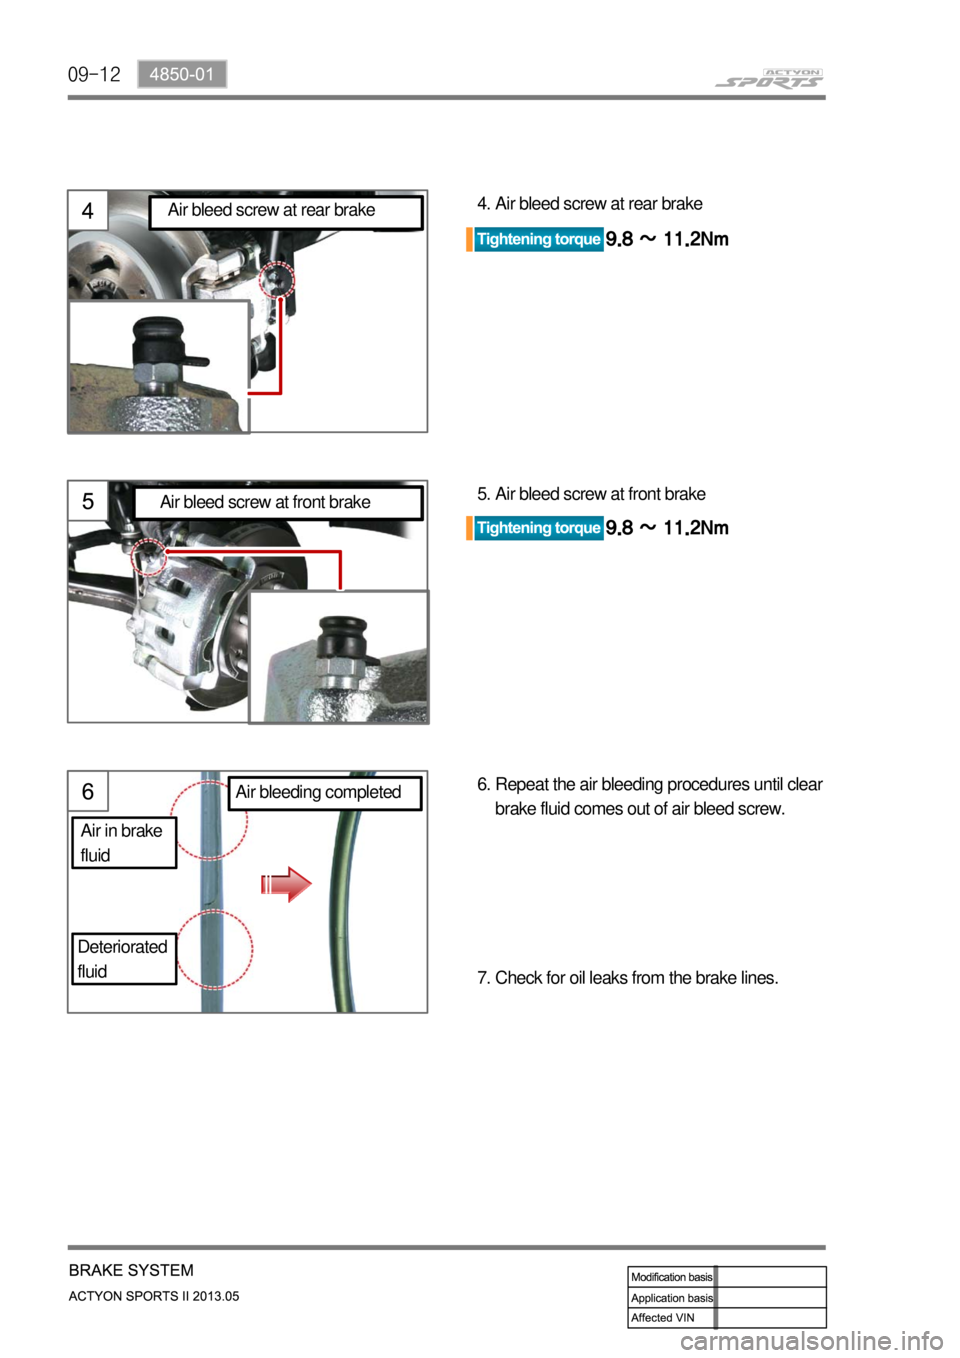 SSANGYONG NEW ACTYON SPORTS 2013  Service Manual 09-12
Air bleed screw at front brake 5.Air bleed screw at rear brake 4.
Repeat the air bleeding procedures until clear 
brake fluid comes out of air bleed screw. 6.
Check for oil leaks from the brake 